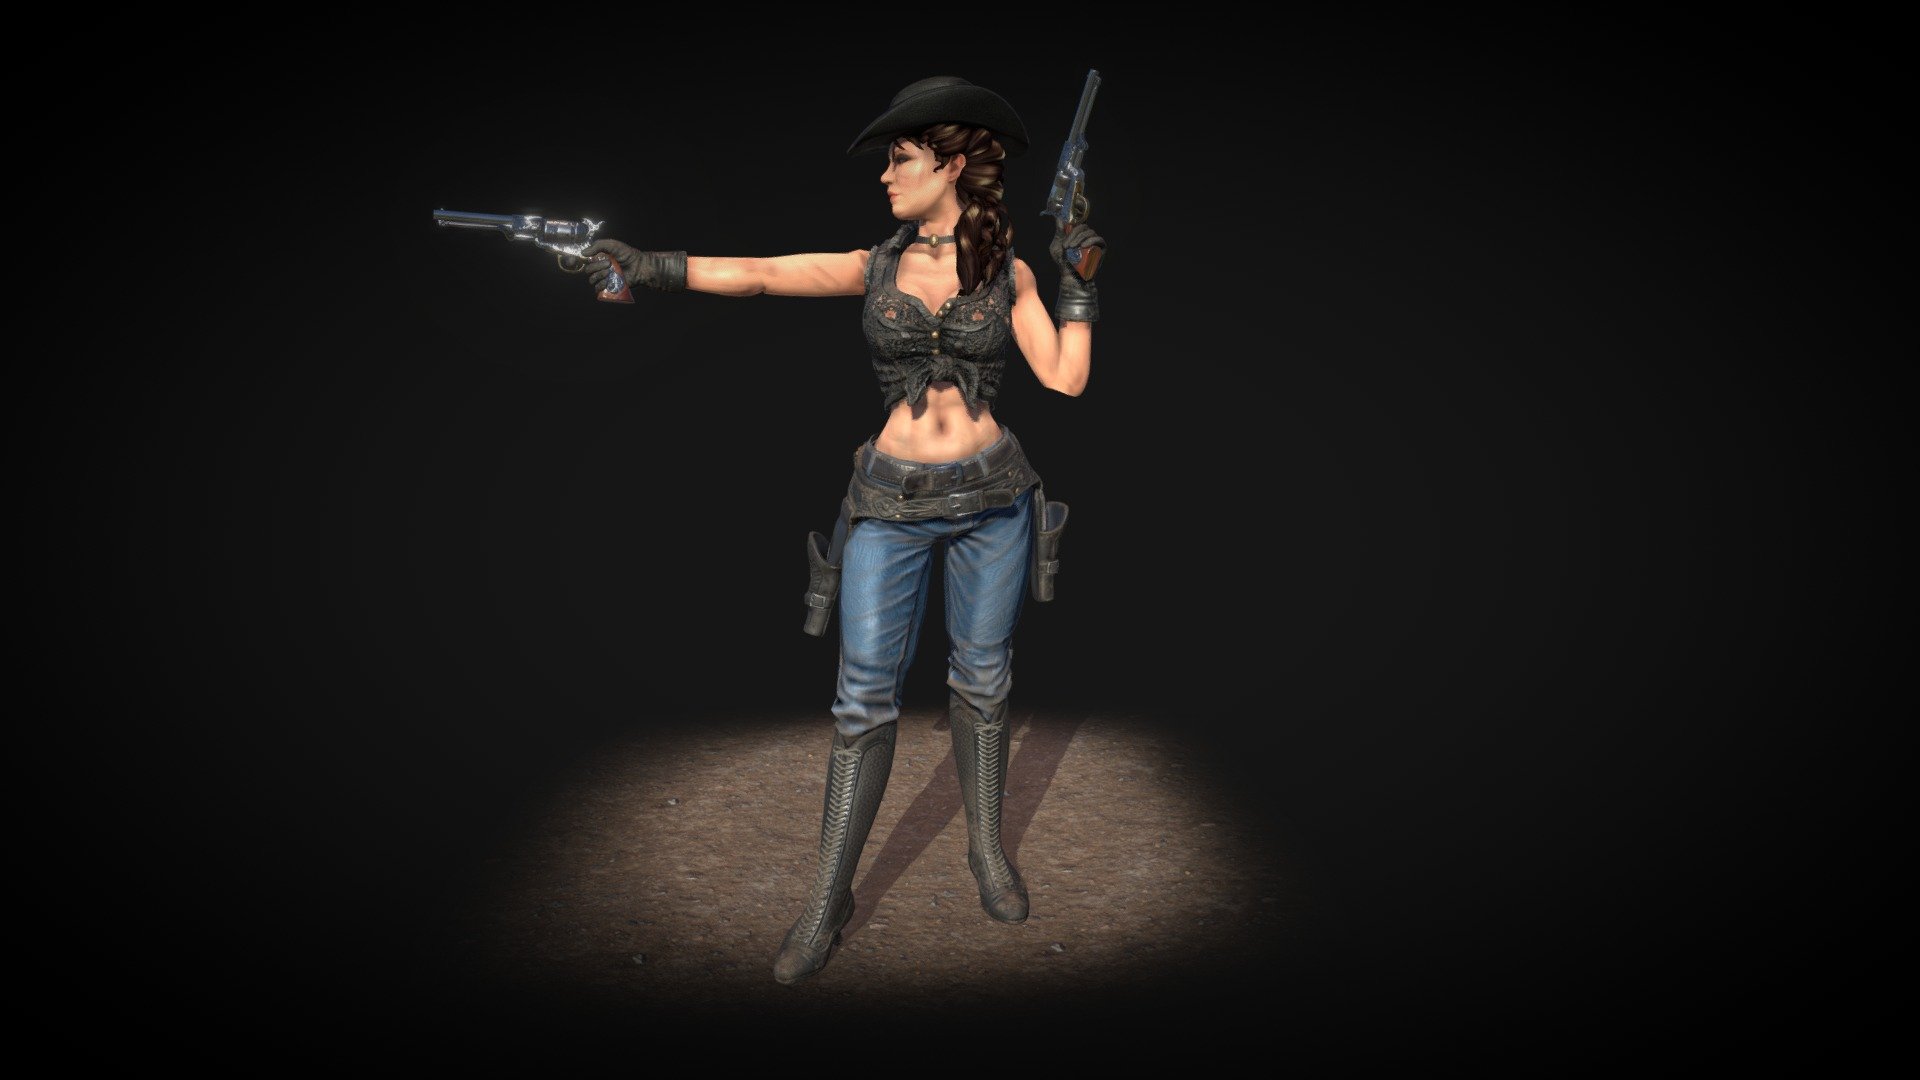 Cowgirl 3d Model By Pvietto 3802721 Sketchfab